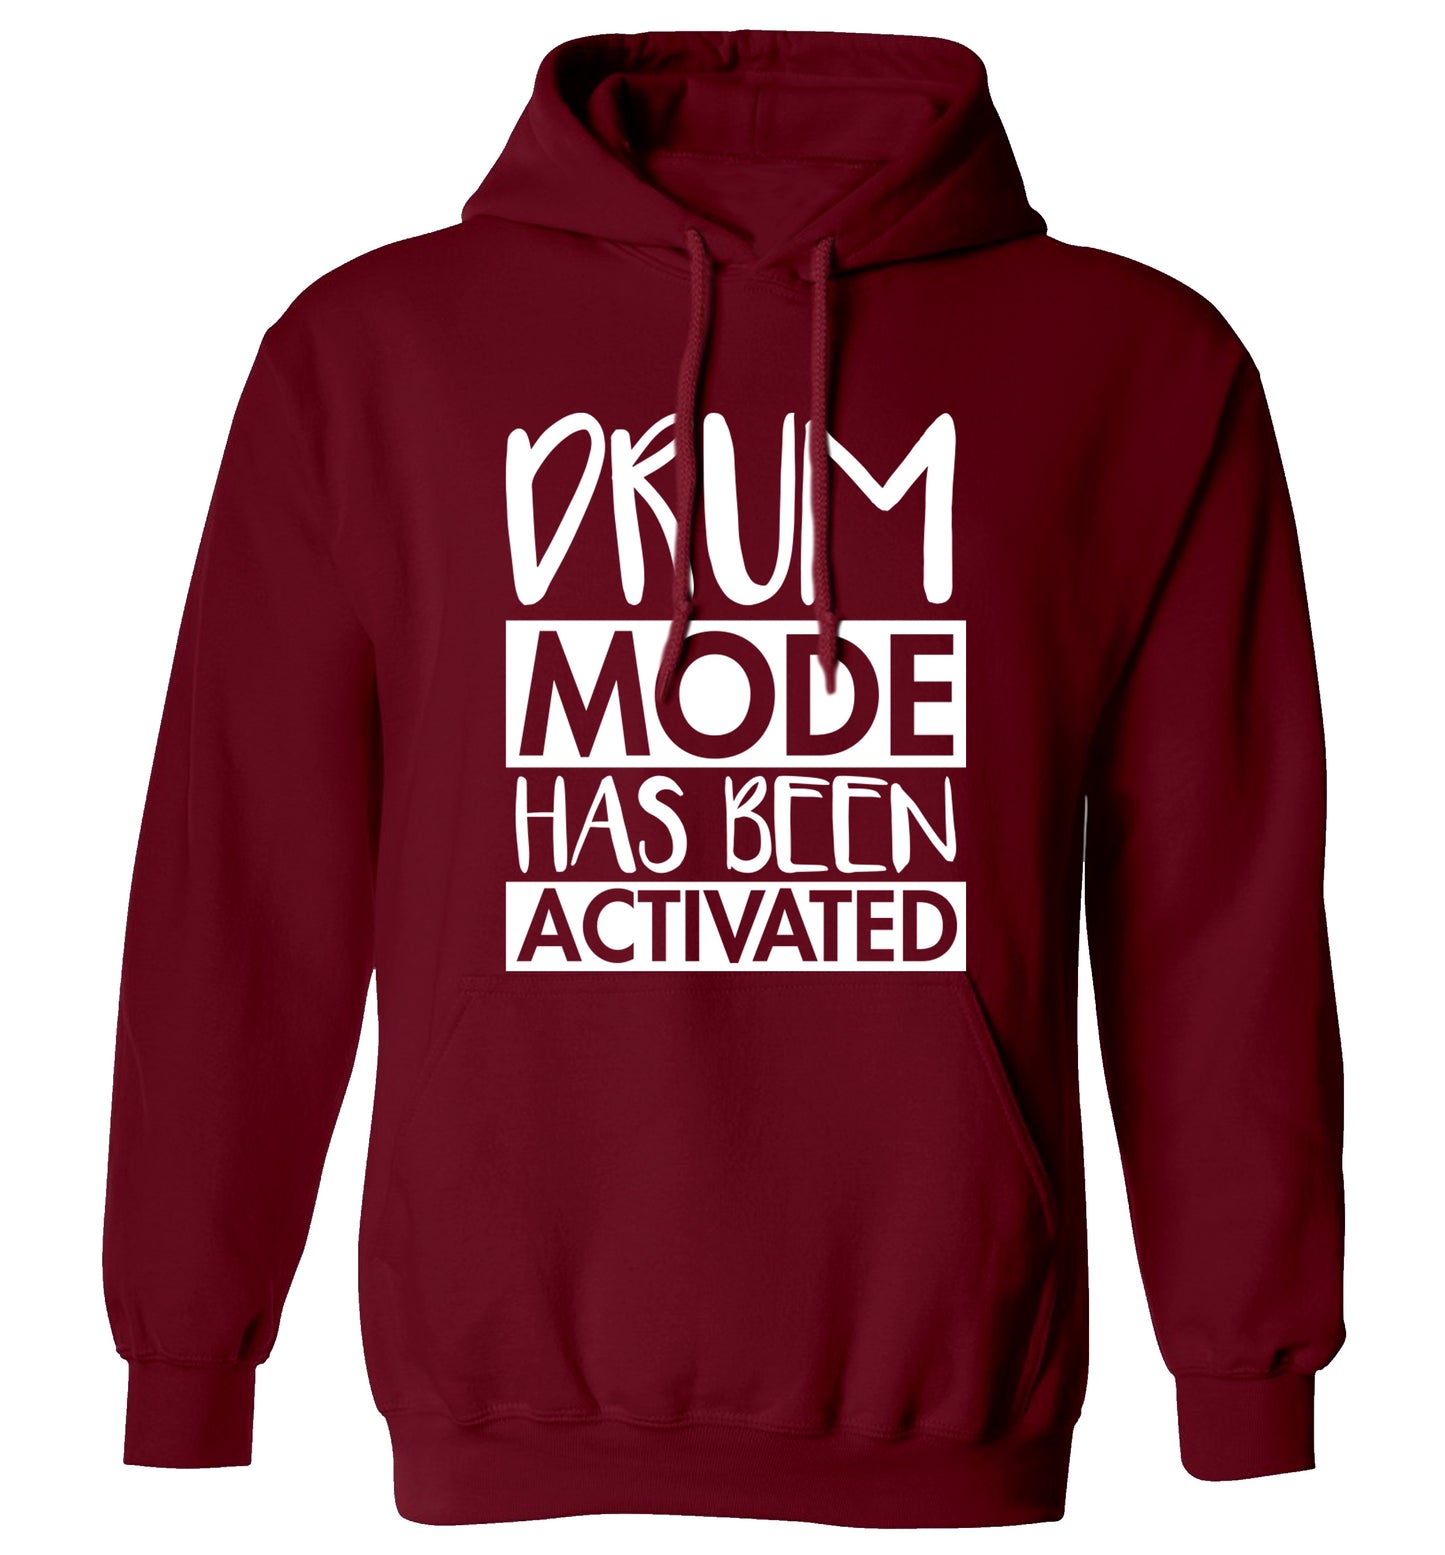 Drum mode activated adults unisexmaroon hoodie 2XL